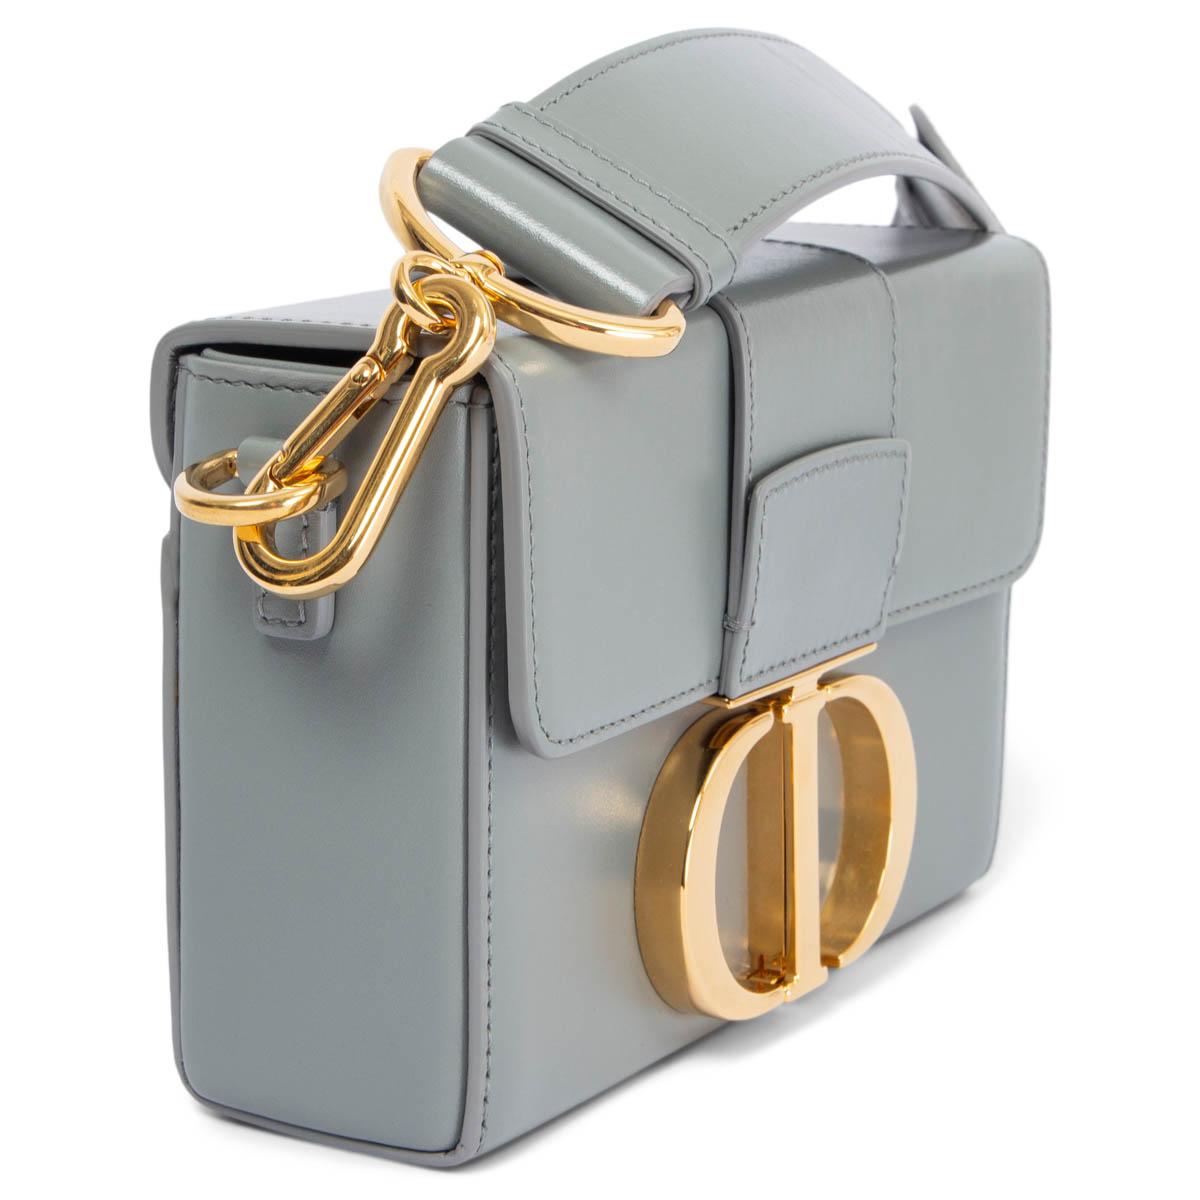 100% authentic Christian Dior 30 Montaigne Box crossbody bag in gray smooth box calfskin. The flap has an antique gold-finish metal 'CD' clasp, inspired by the seal of a Christian Dior perfume bottle. Embossed '30 MONTAIGNE' signature at the back.